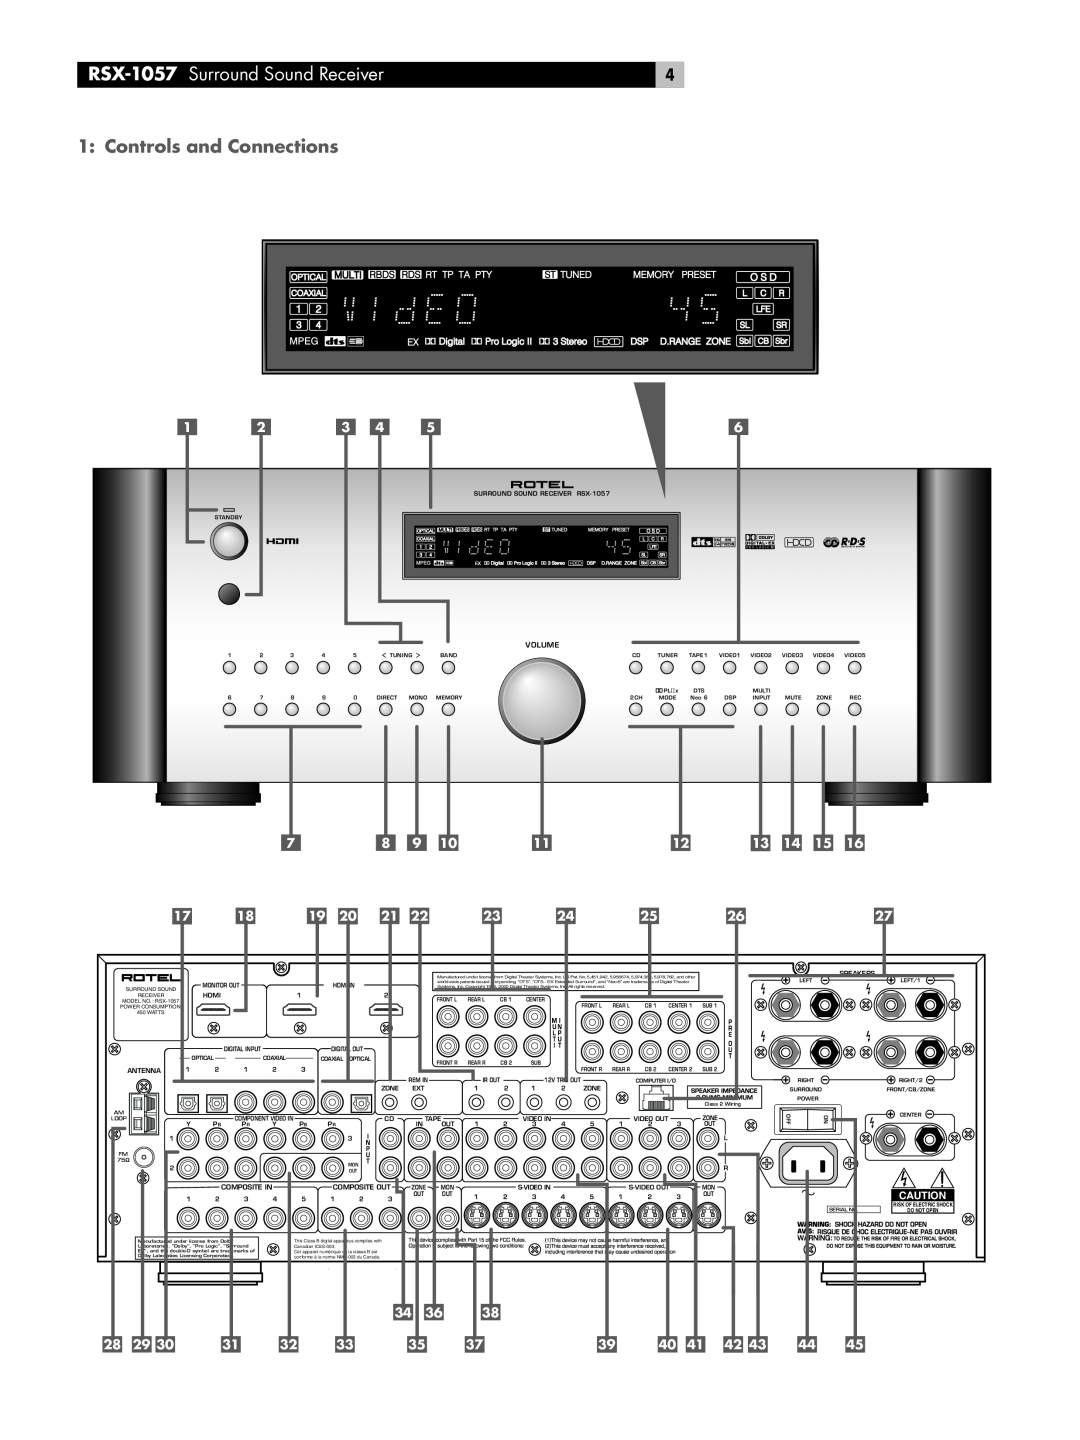 Rotel owner manual RSX-1057 Surround Sound Receiver, 1: Controls and Connections 